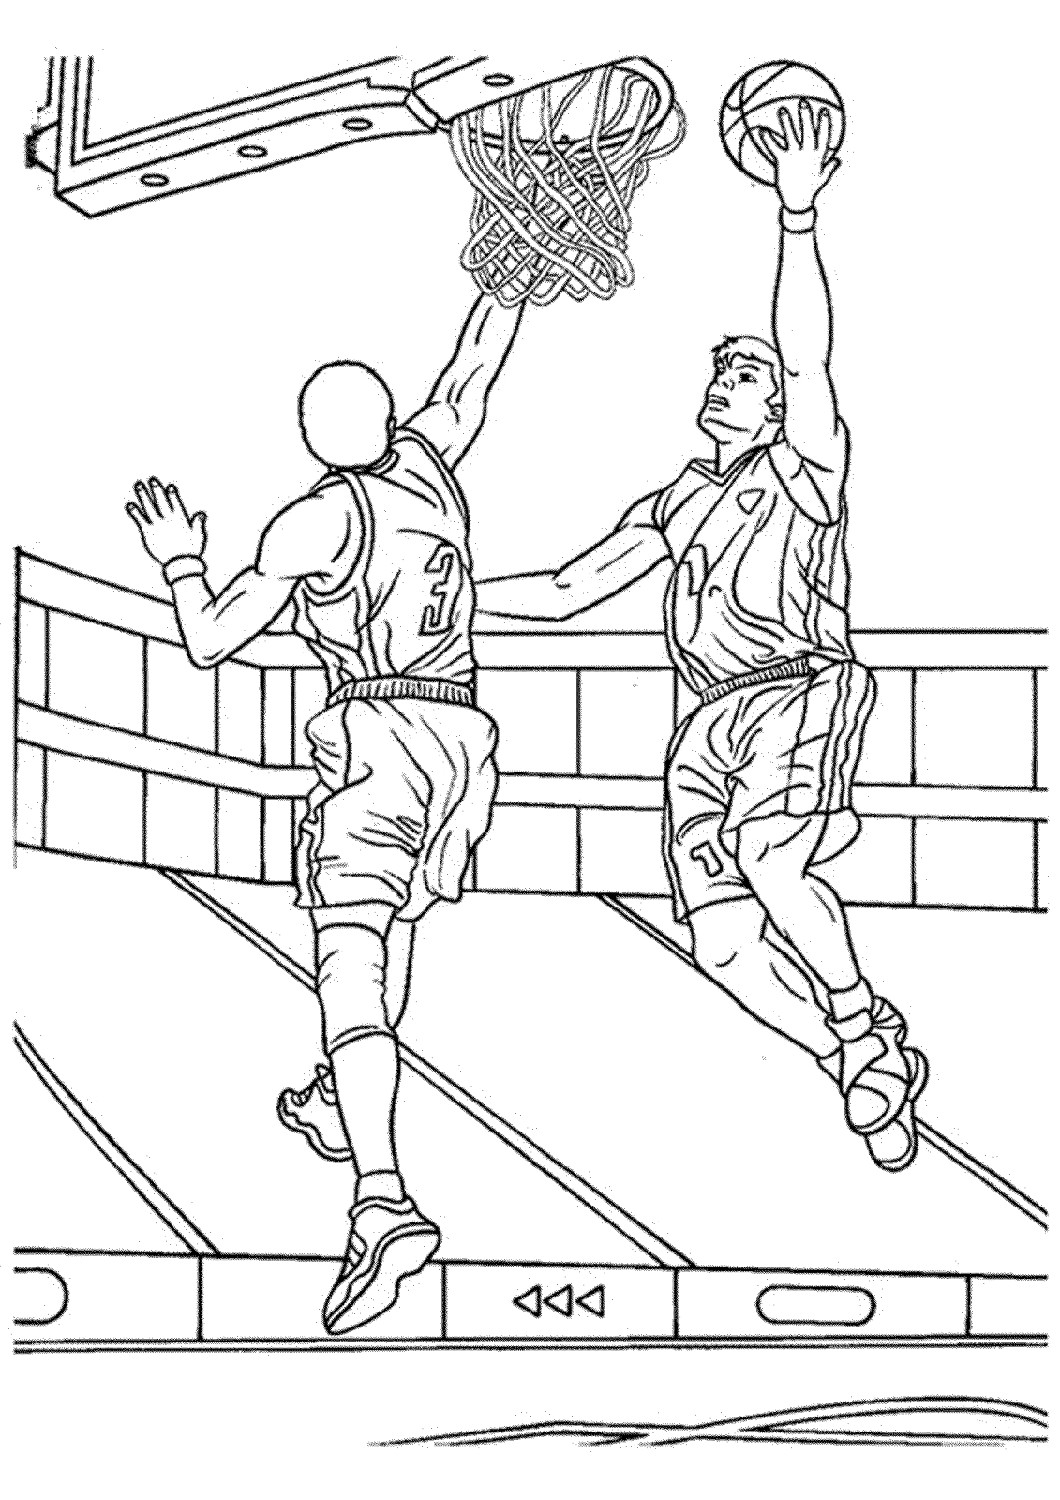 Sports Coloring Pages For Adults
 Free Basketball Color Pages